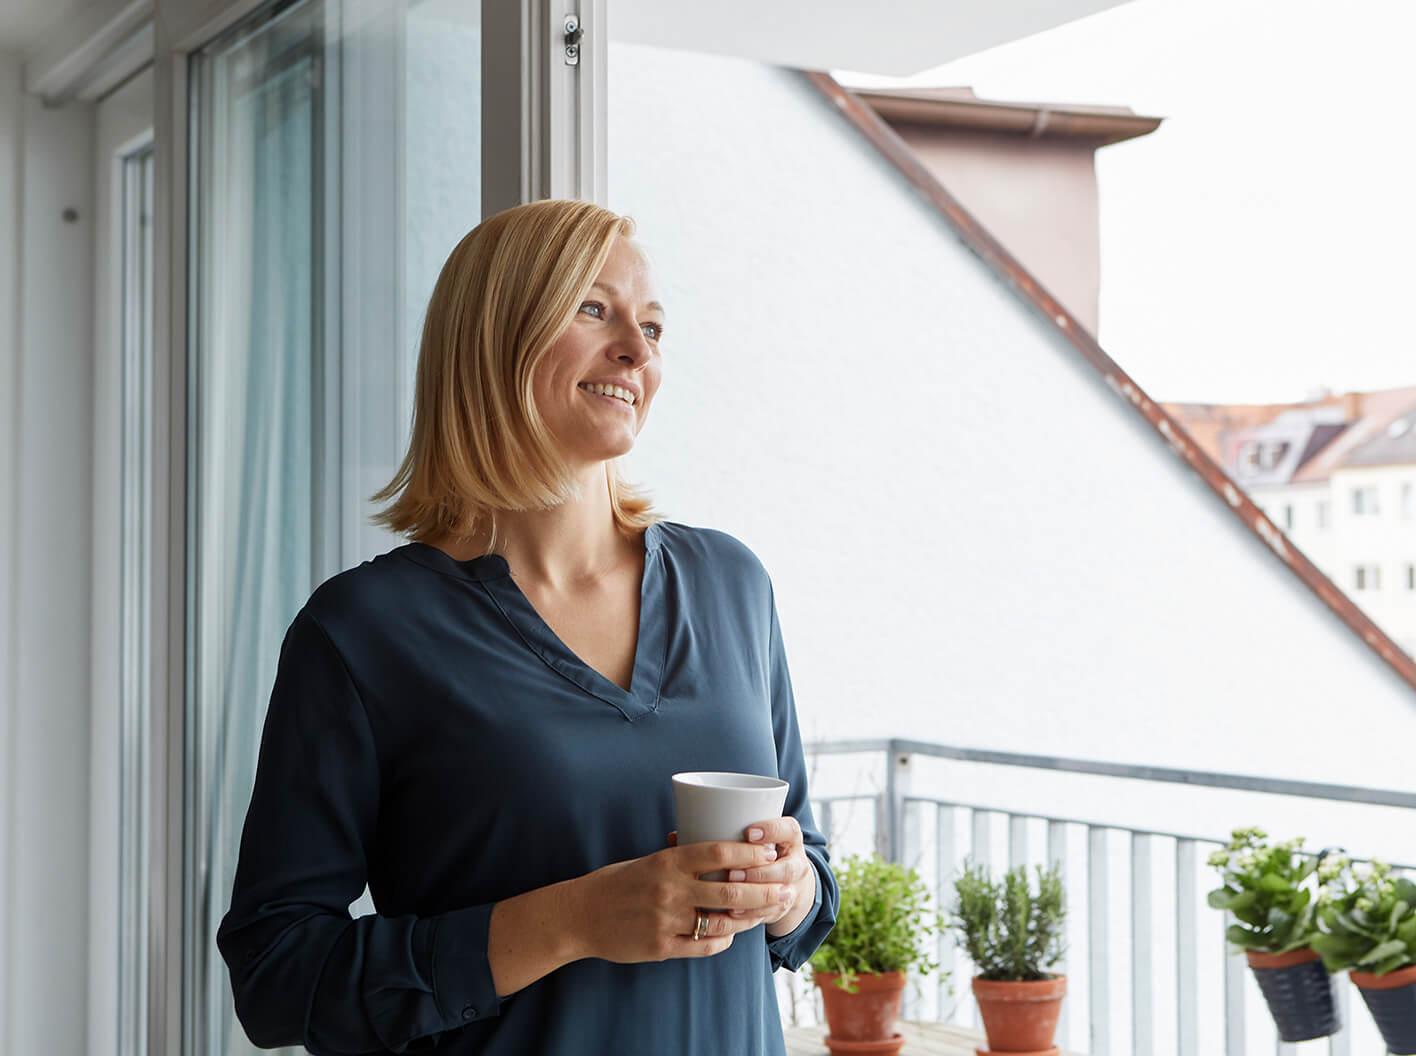 Smiling woman looking outside while holding a beverage mug.